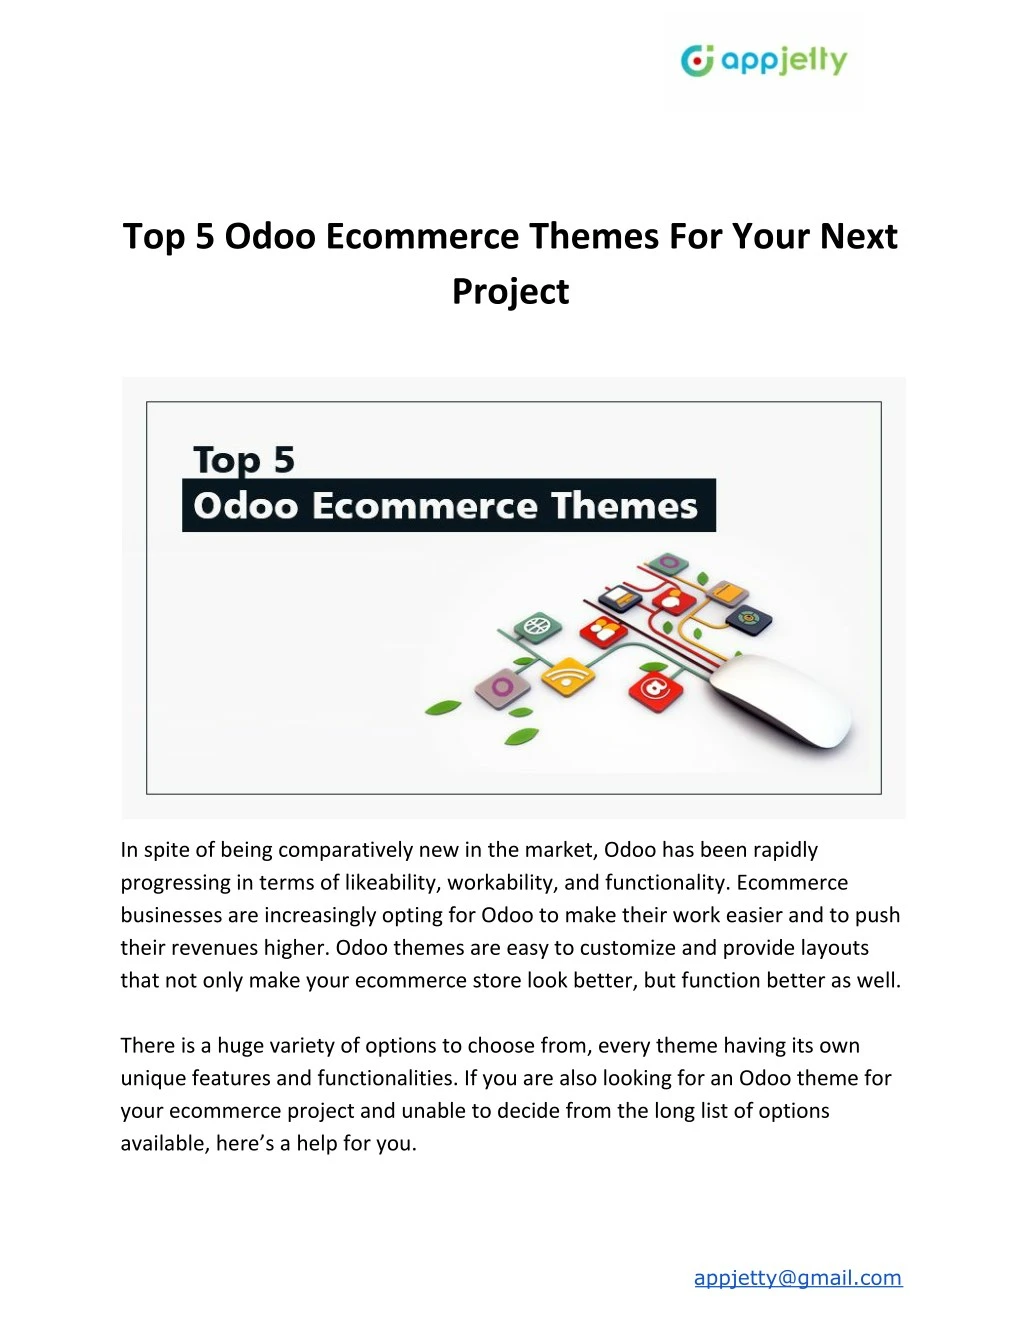 top 5 odoo ecommerce themes for your next project